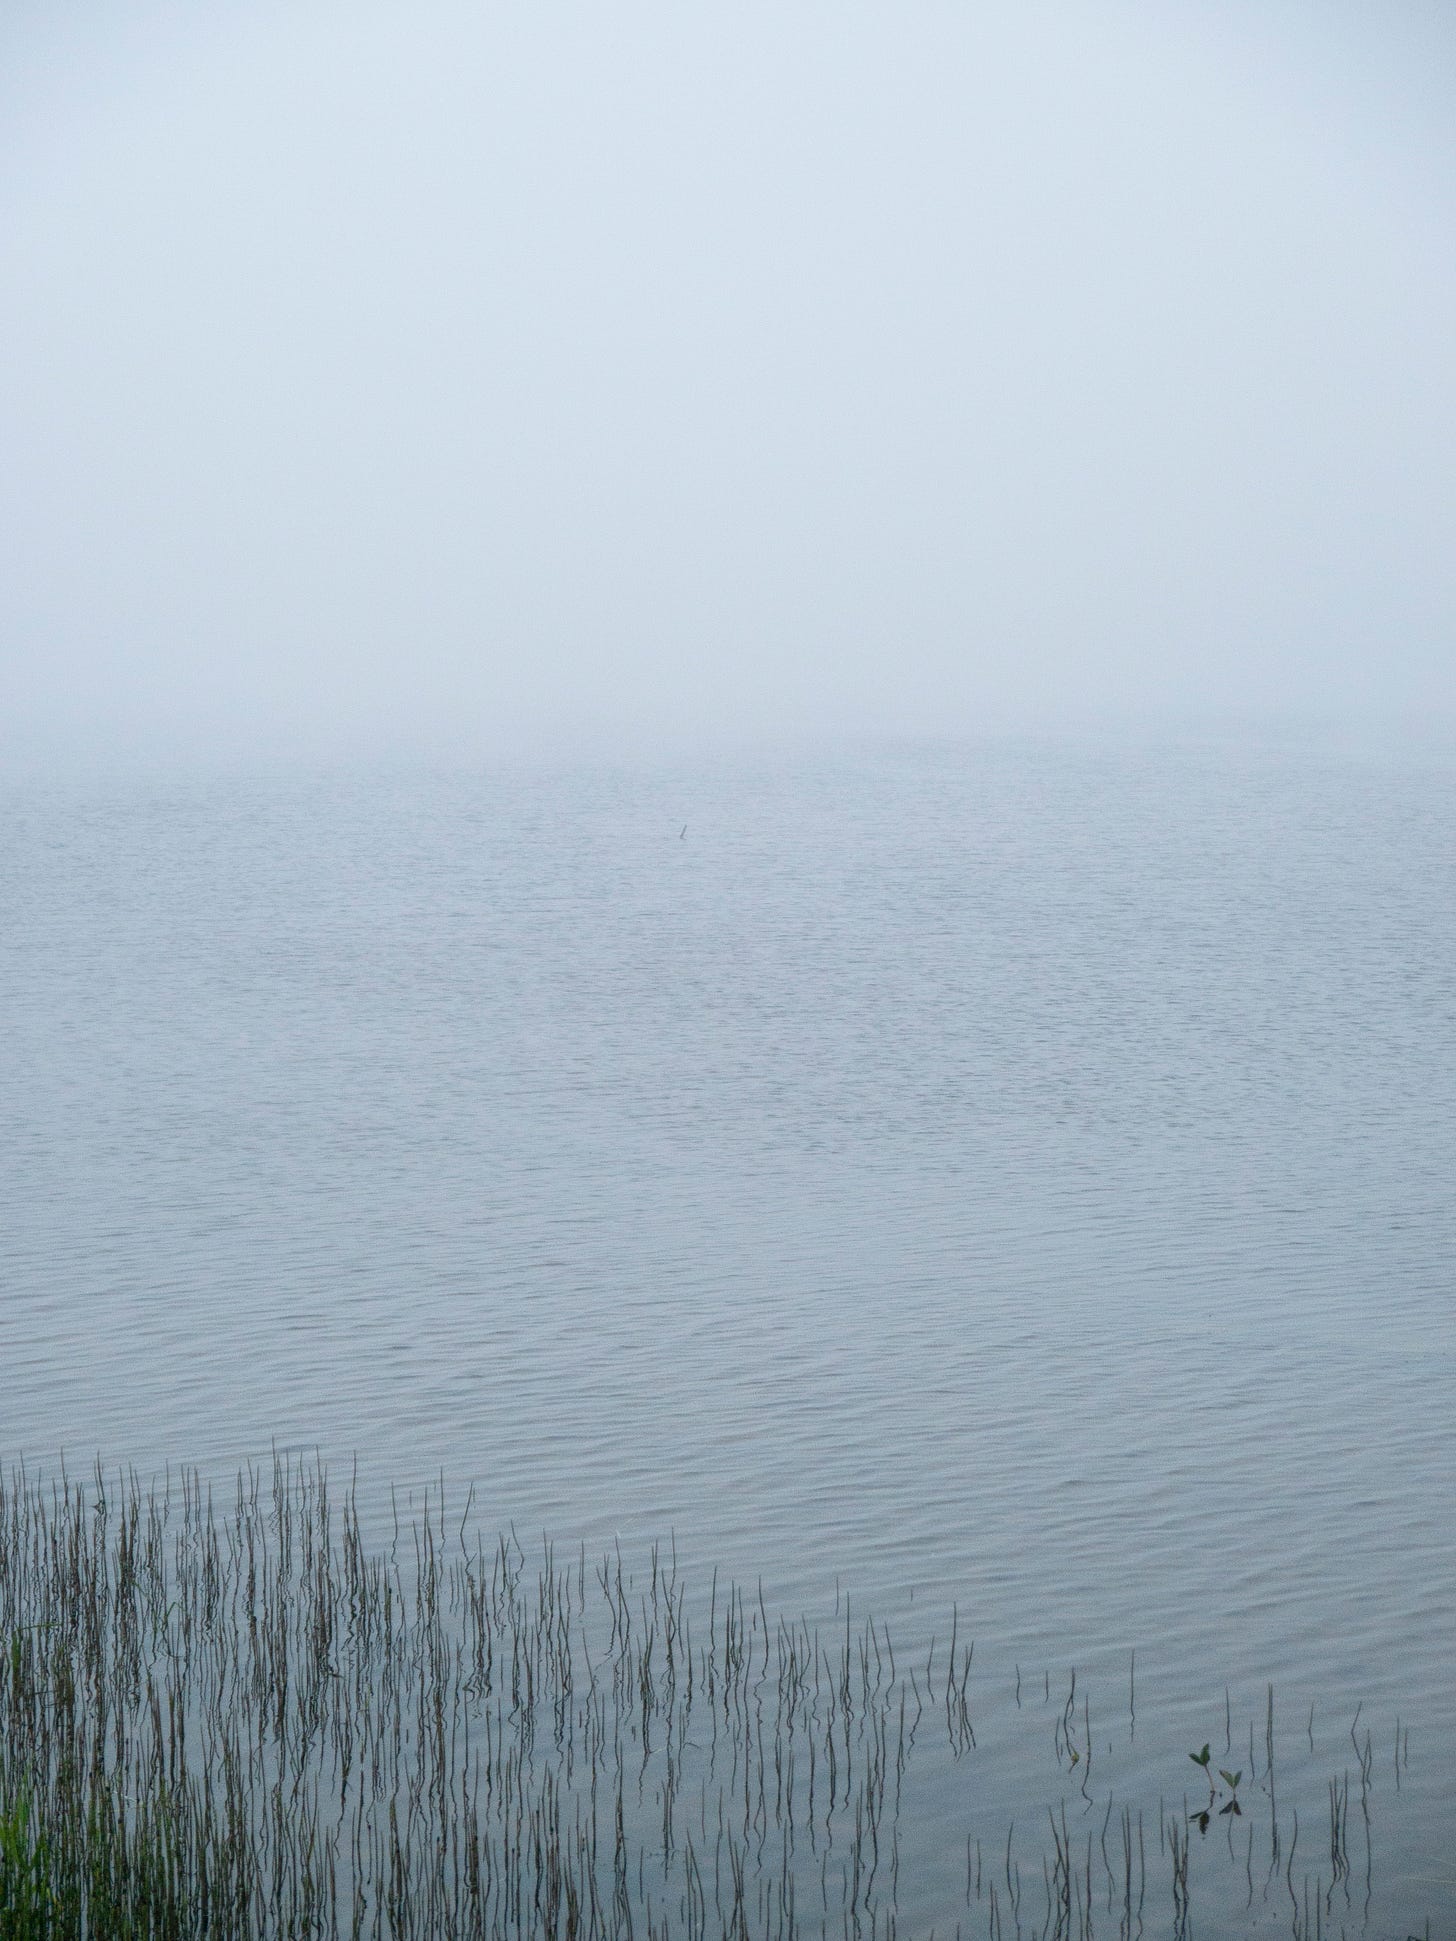 Fog over water with reeds in the shallows